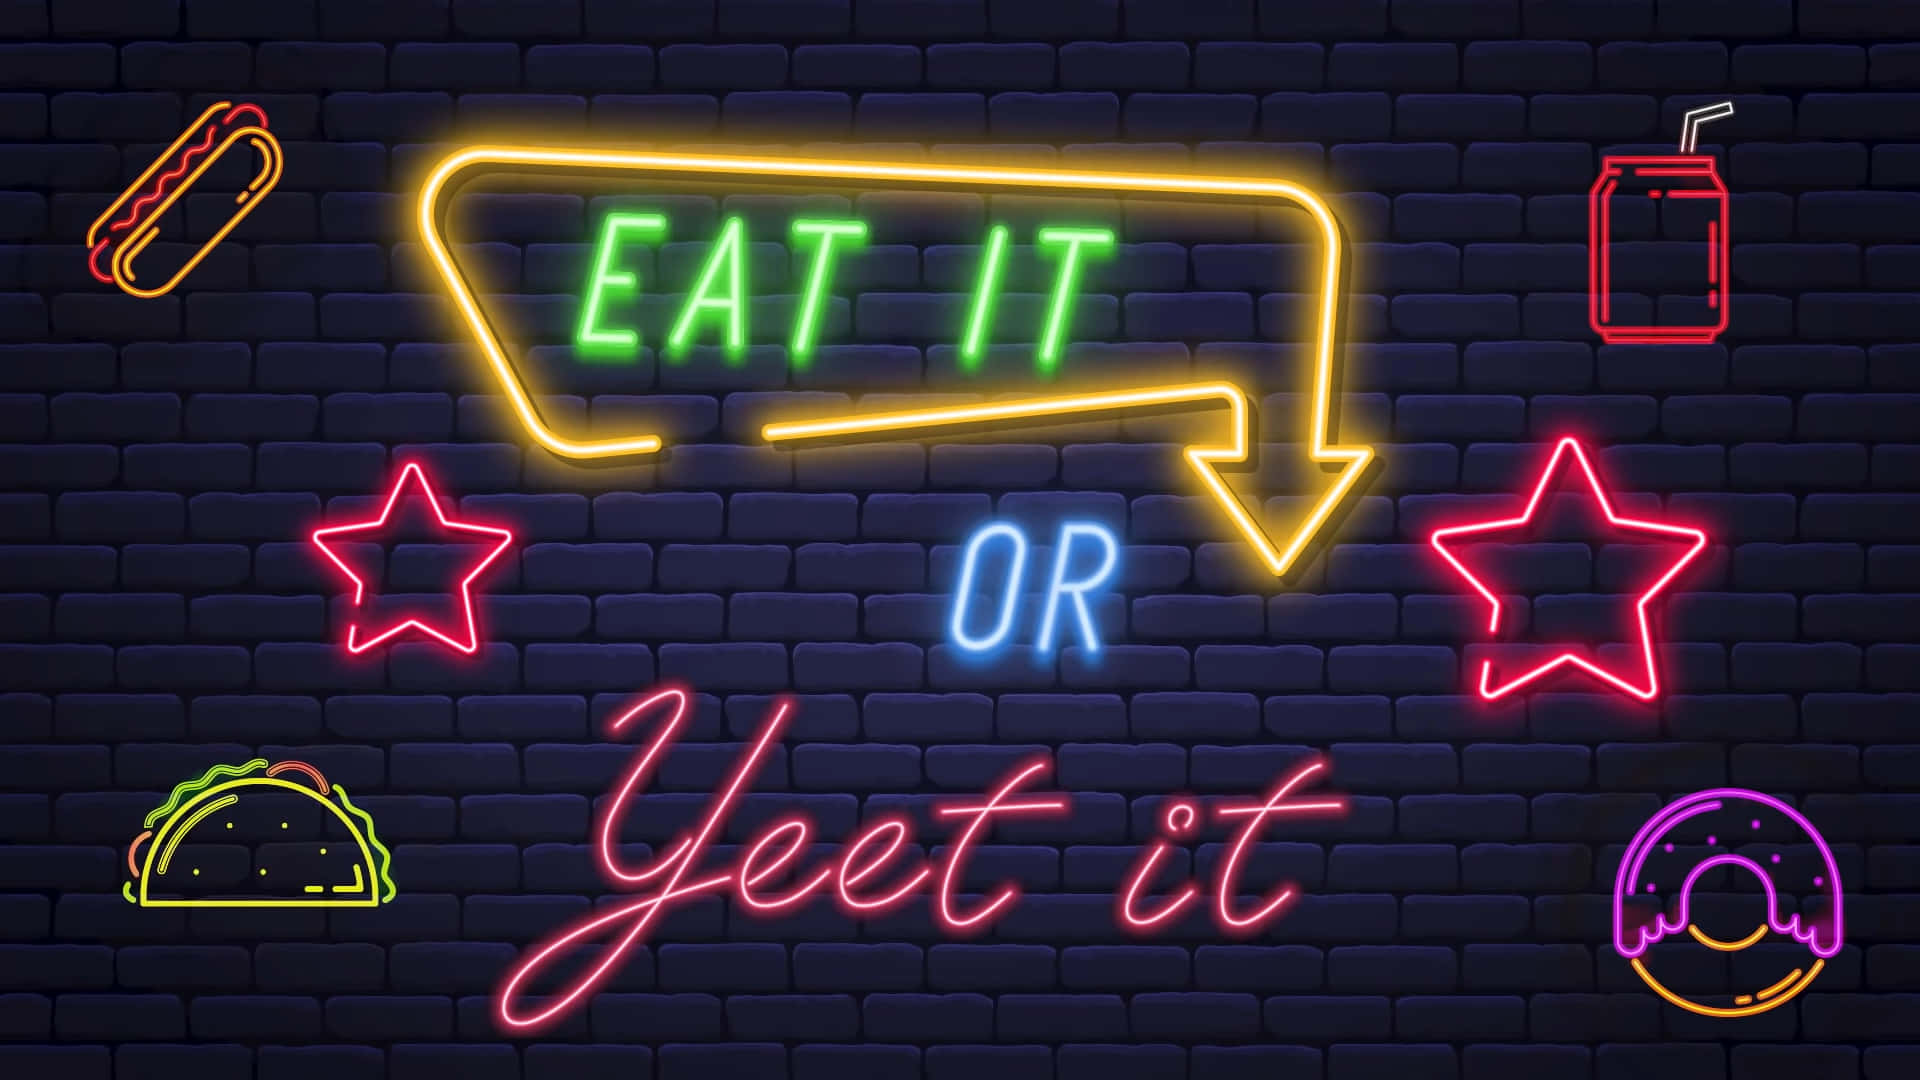 "Yee Or Be Yeeted - Don't forget that you decide your own destiny!" Wallpaper